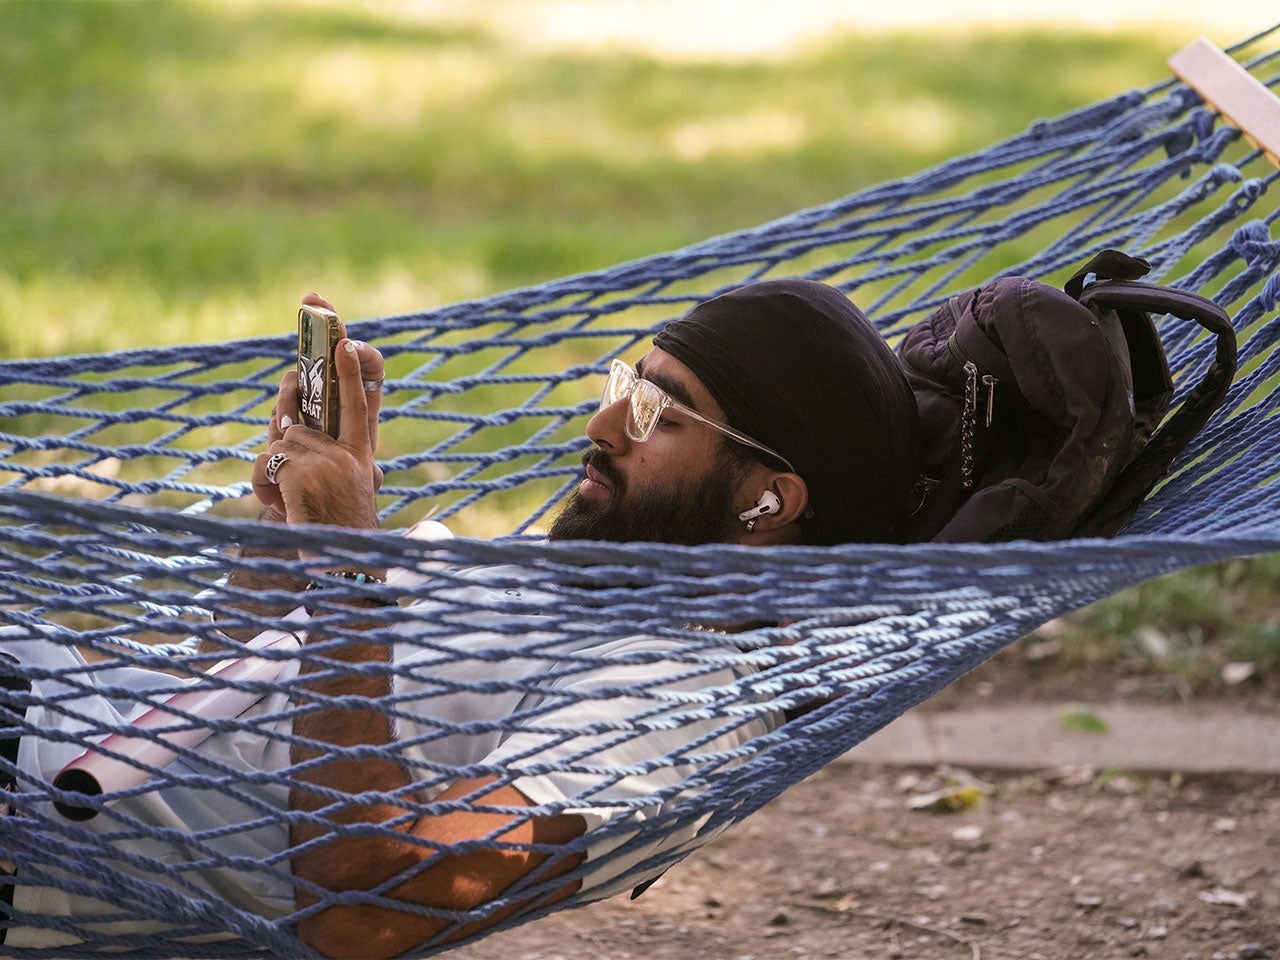 A UC Davis student scrolls on their phone while swinging in a blue hammock on campus.